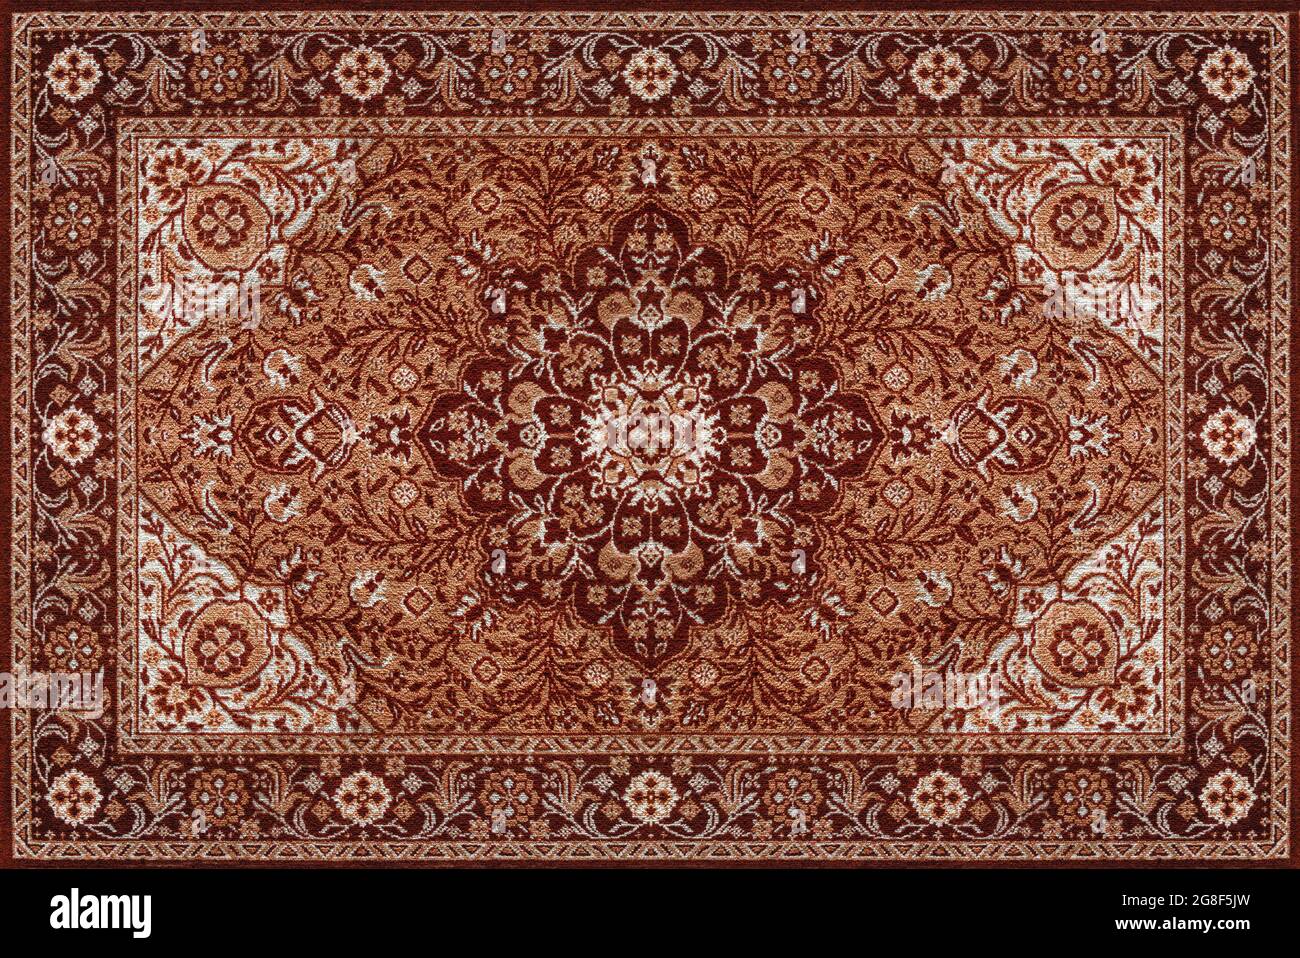 Old Brown Persian Carpet Texture, abstract ornament Stock Photo - Alamy